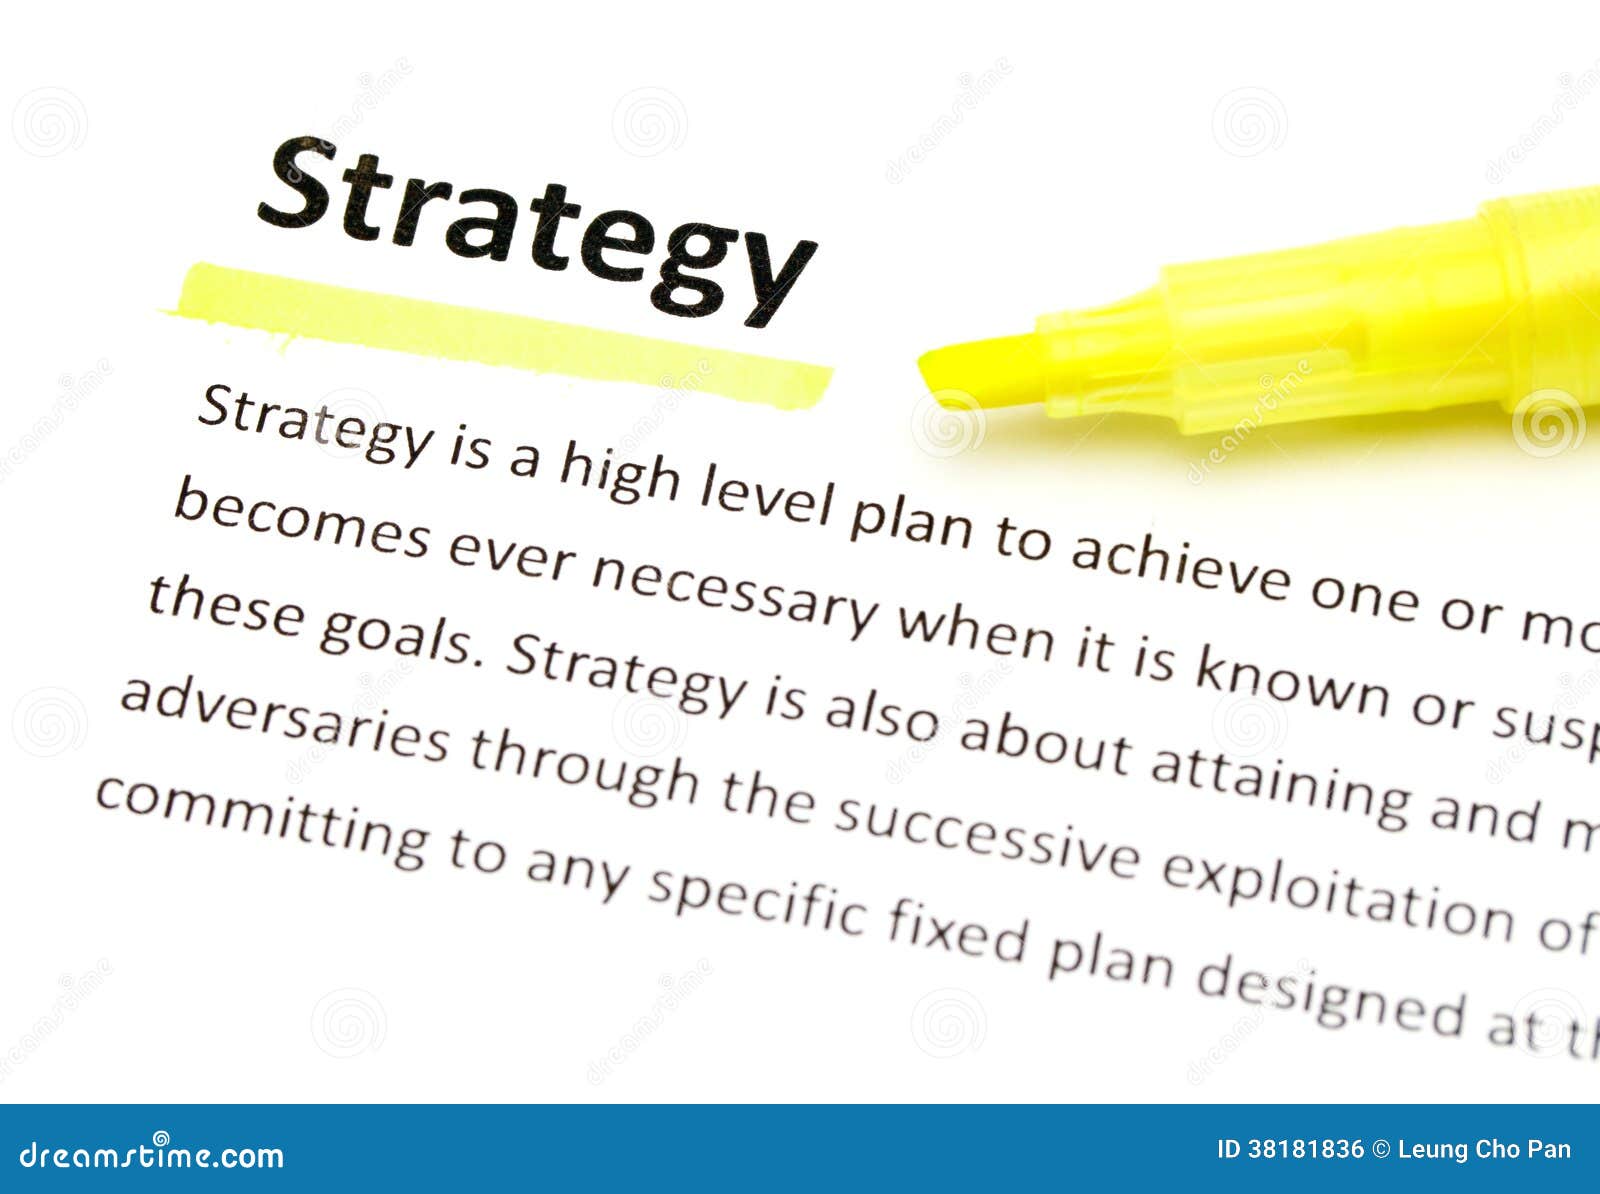 Difference Between Strategic & Operational Objectives